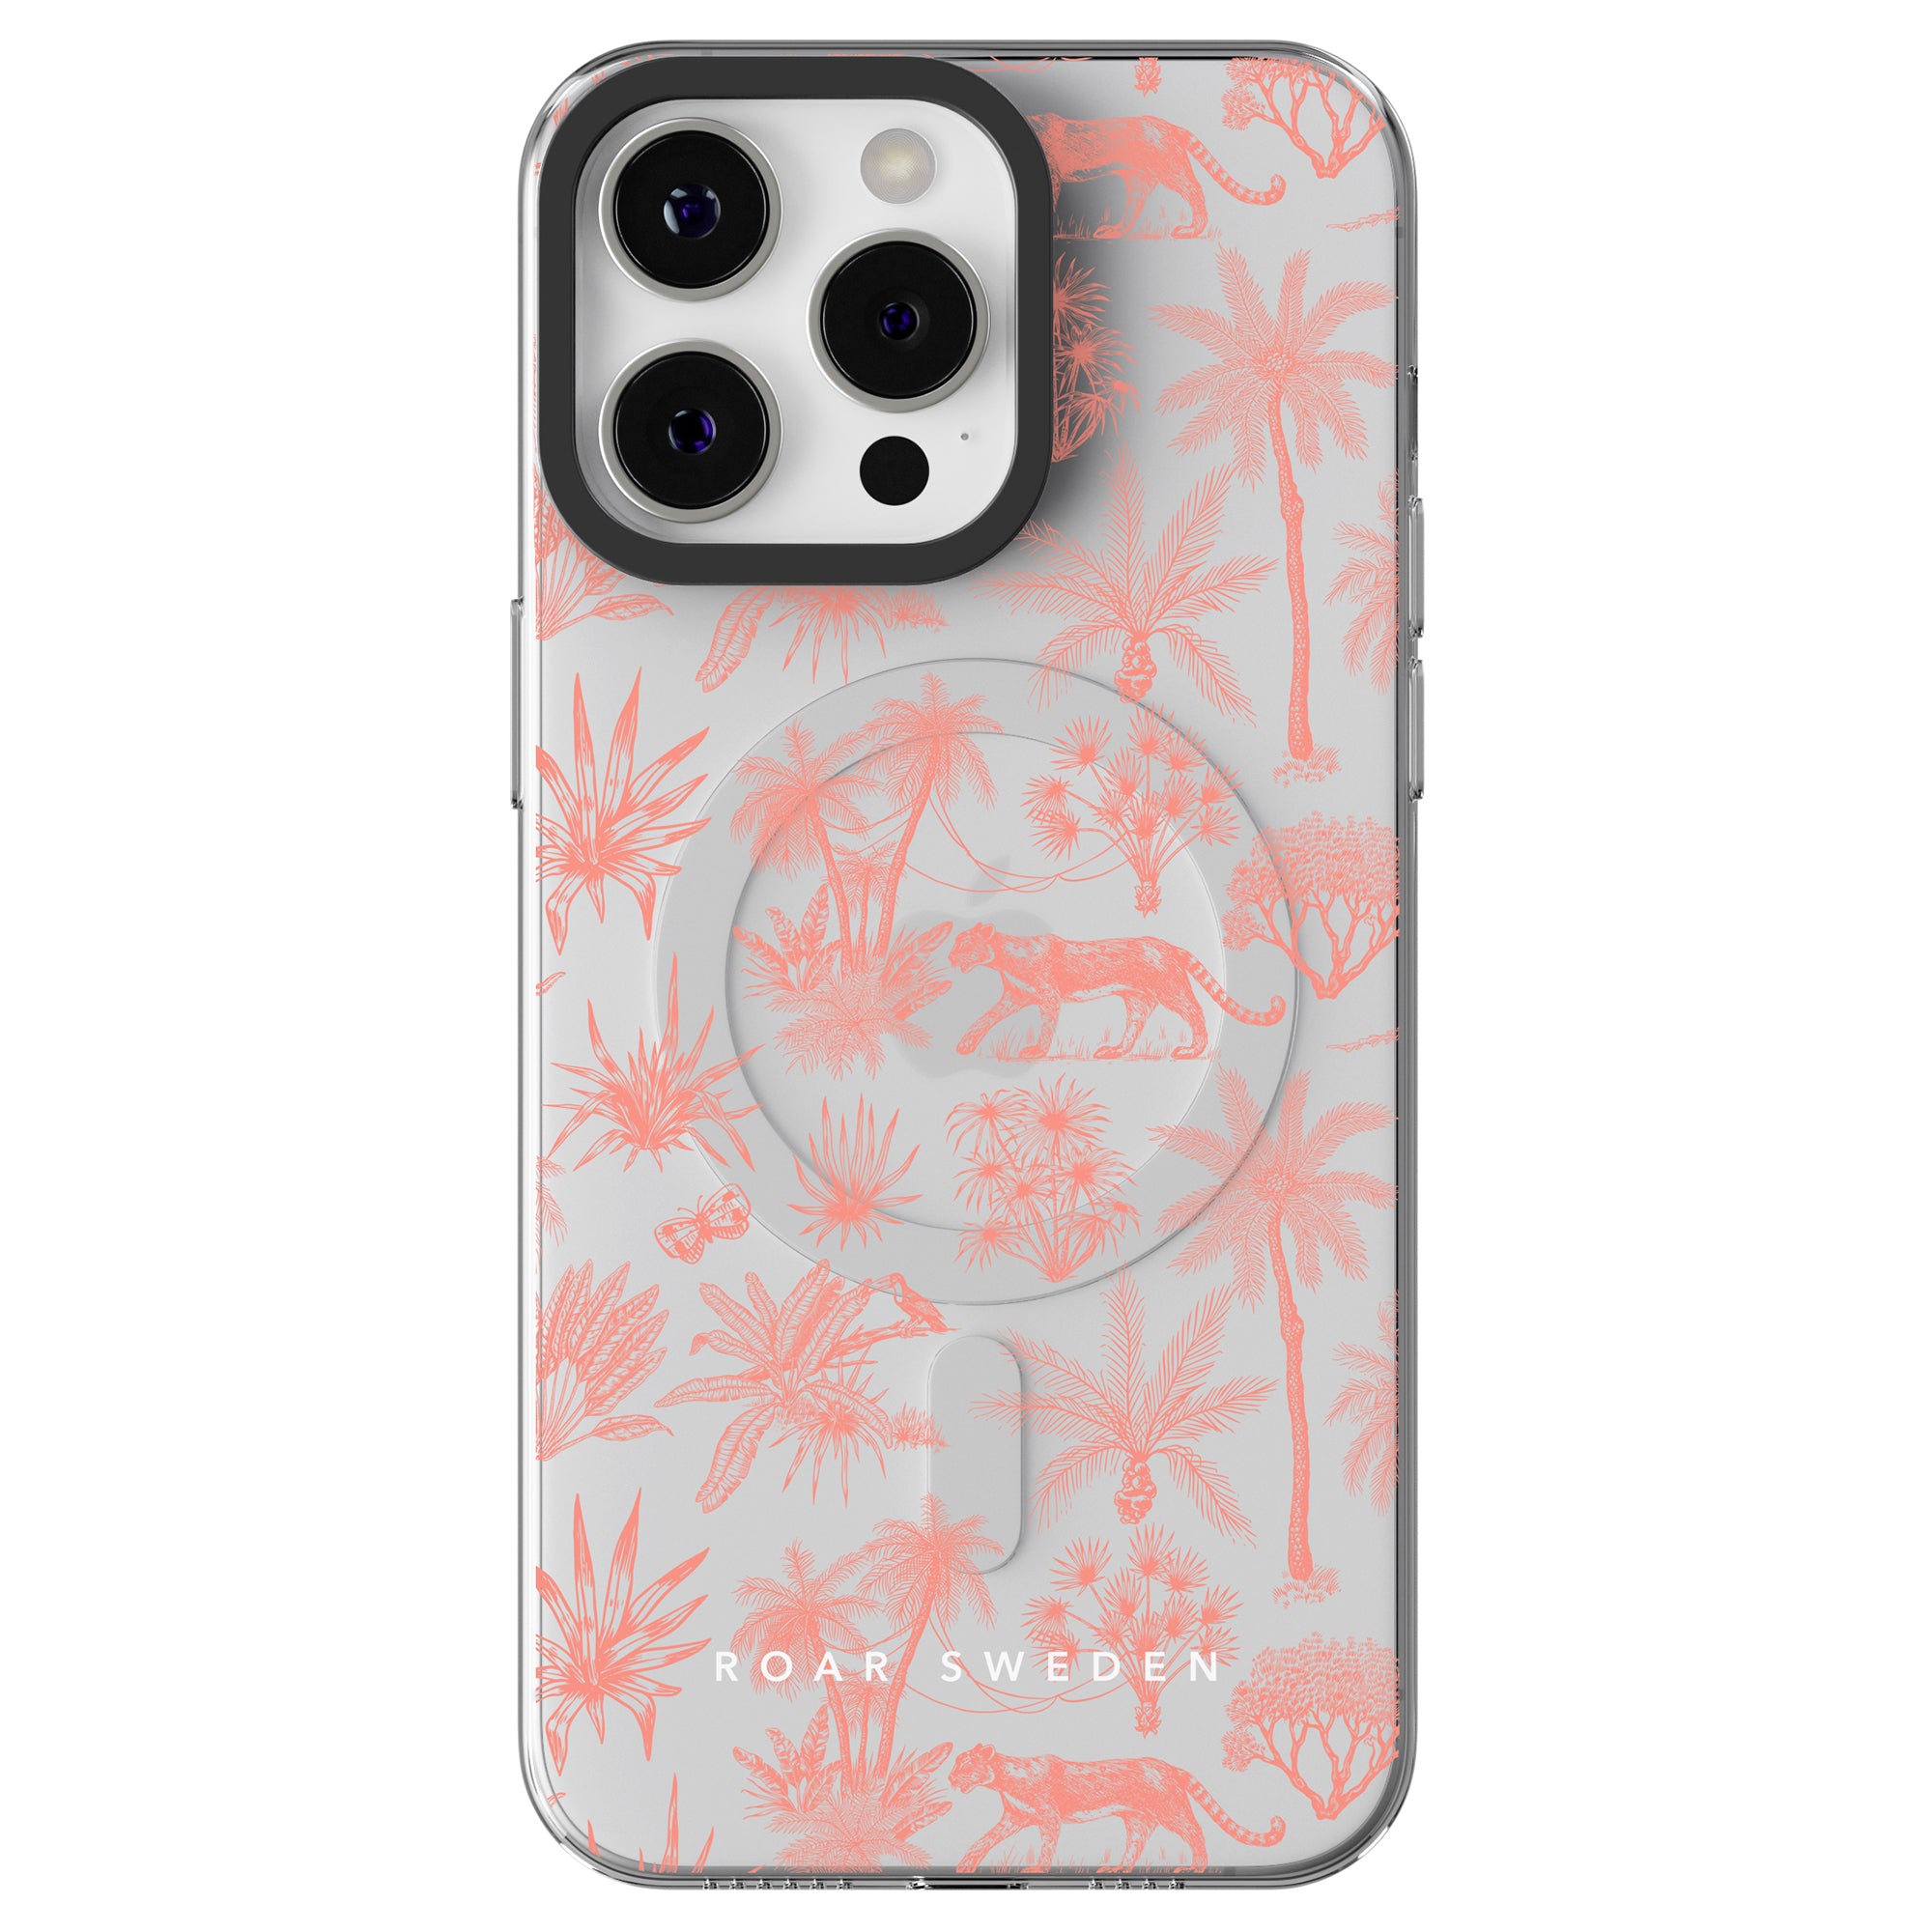 A Toile De Jouy Coral - MagSafe with a clear case featuring a pink tropical Toile De Jouy Coral pattern with palm trees and animals. The "ROAR SWEDEN" brand name is prominently displayed at the bottom, and it is also a MagSafe Case for added functionality.